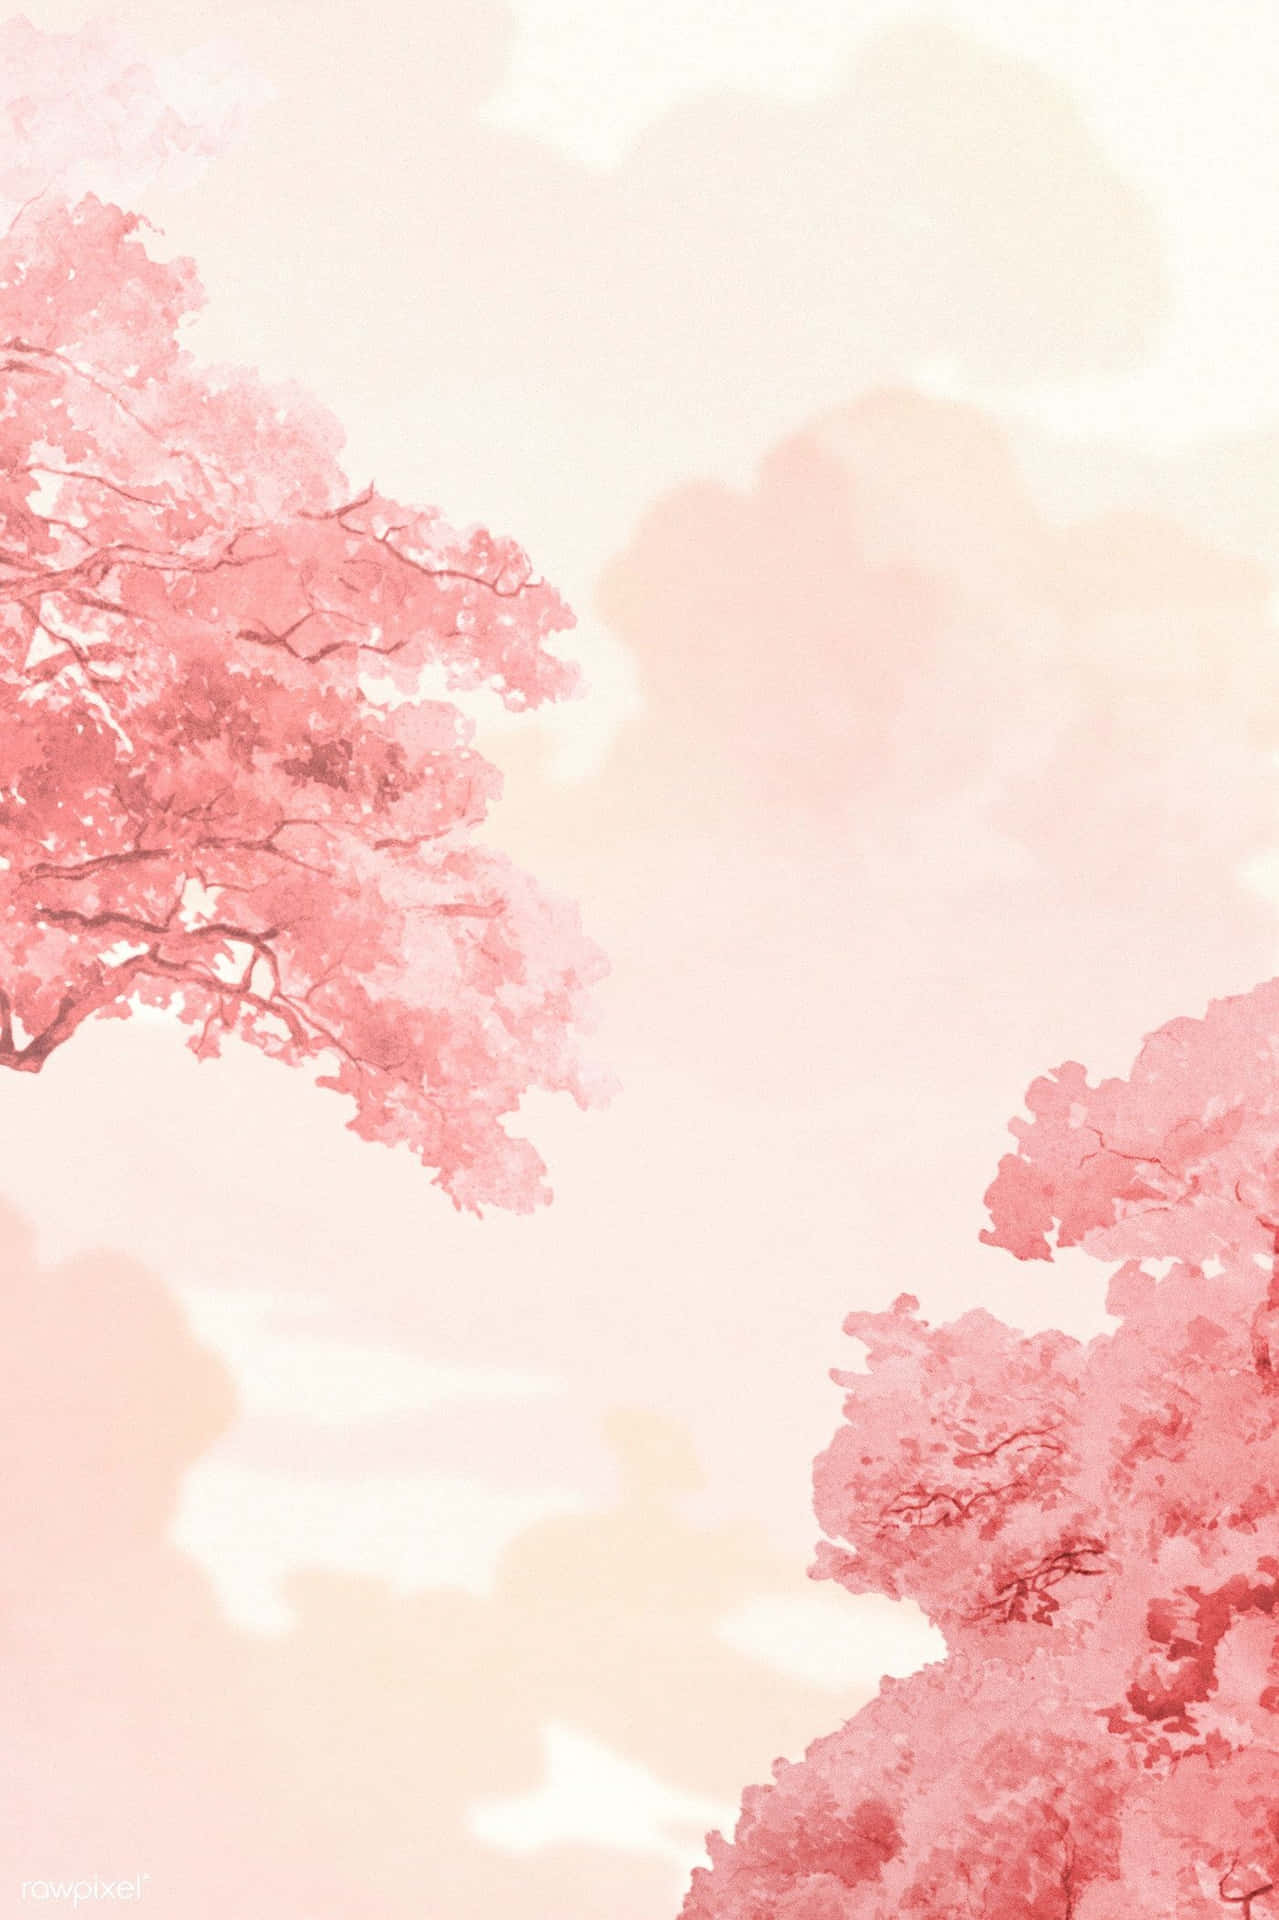 Pink Trees With Pink Aesthetic Background Wallpaper